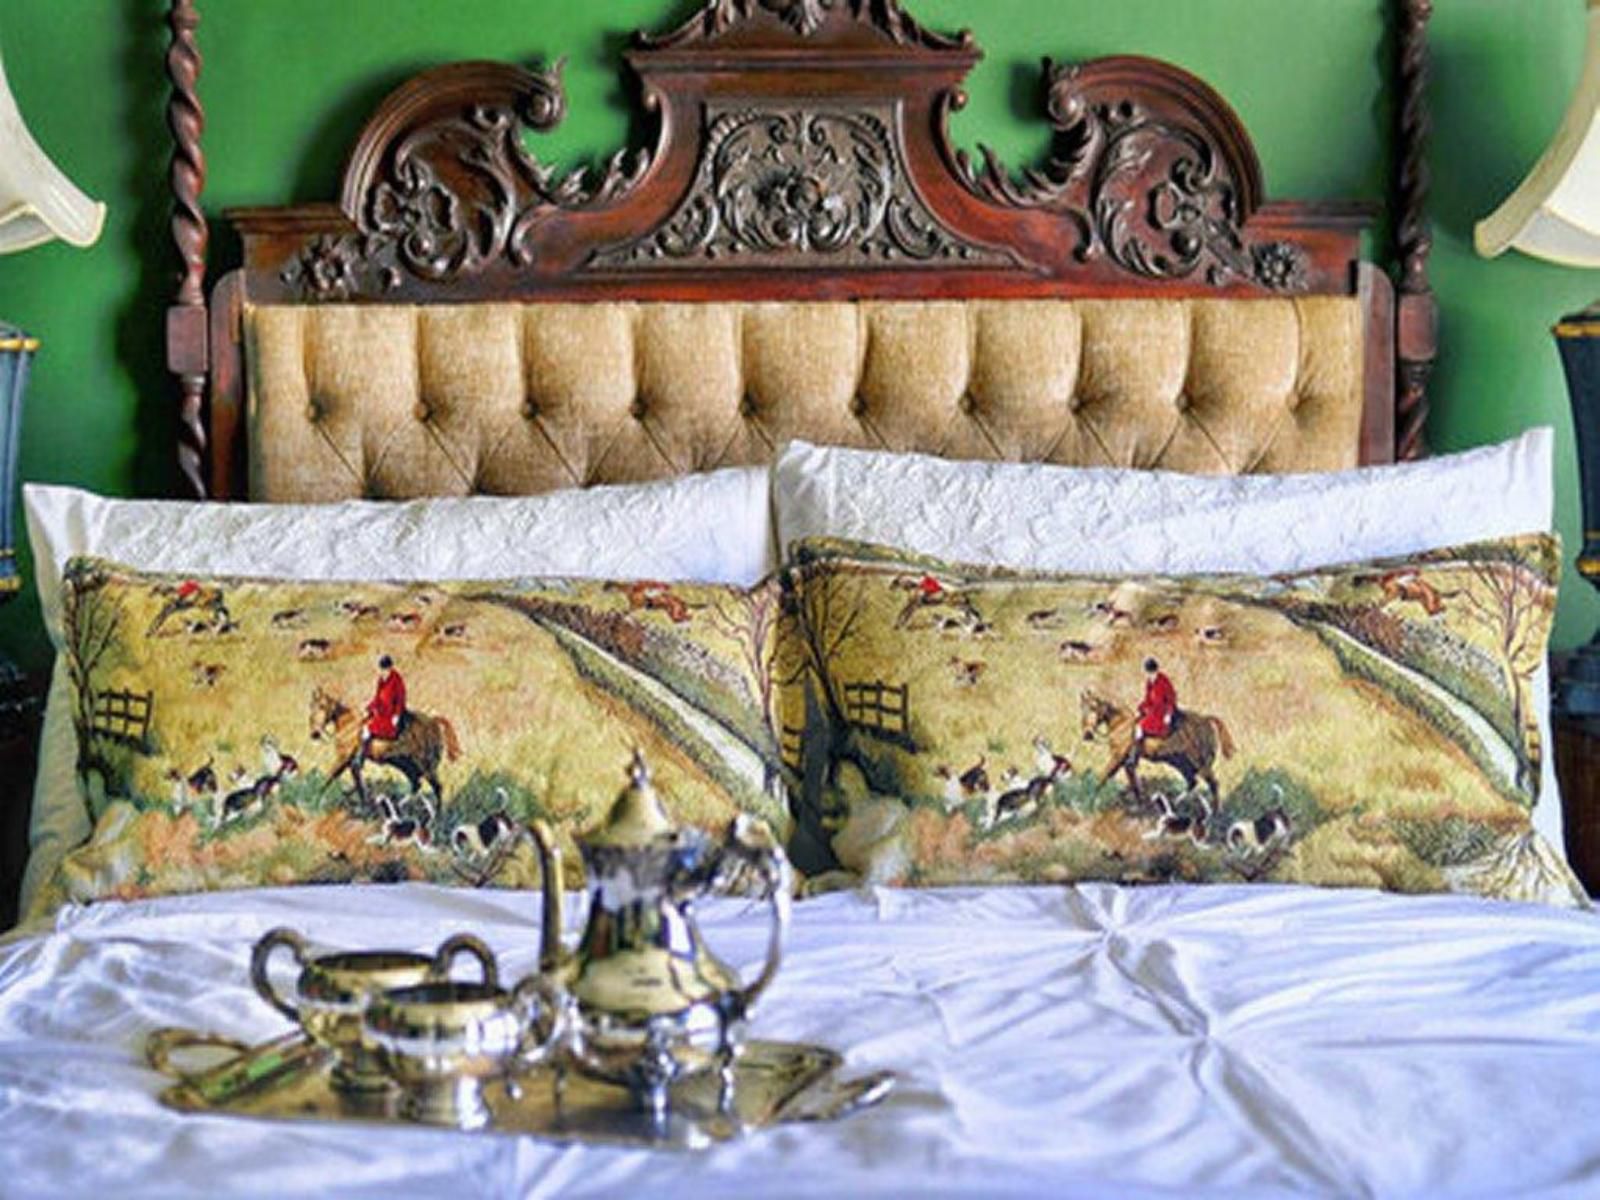 House Of Visconti Morningside Ct Somerset West Western Cape South Africa Complementary Colors, Bedroom